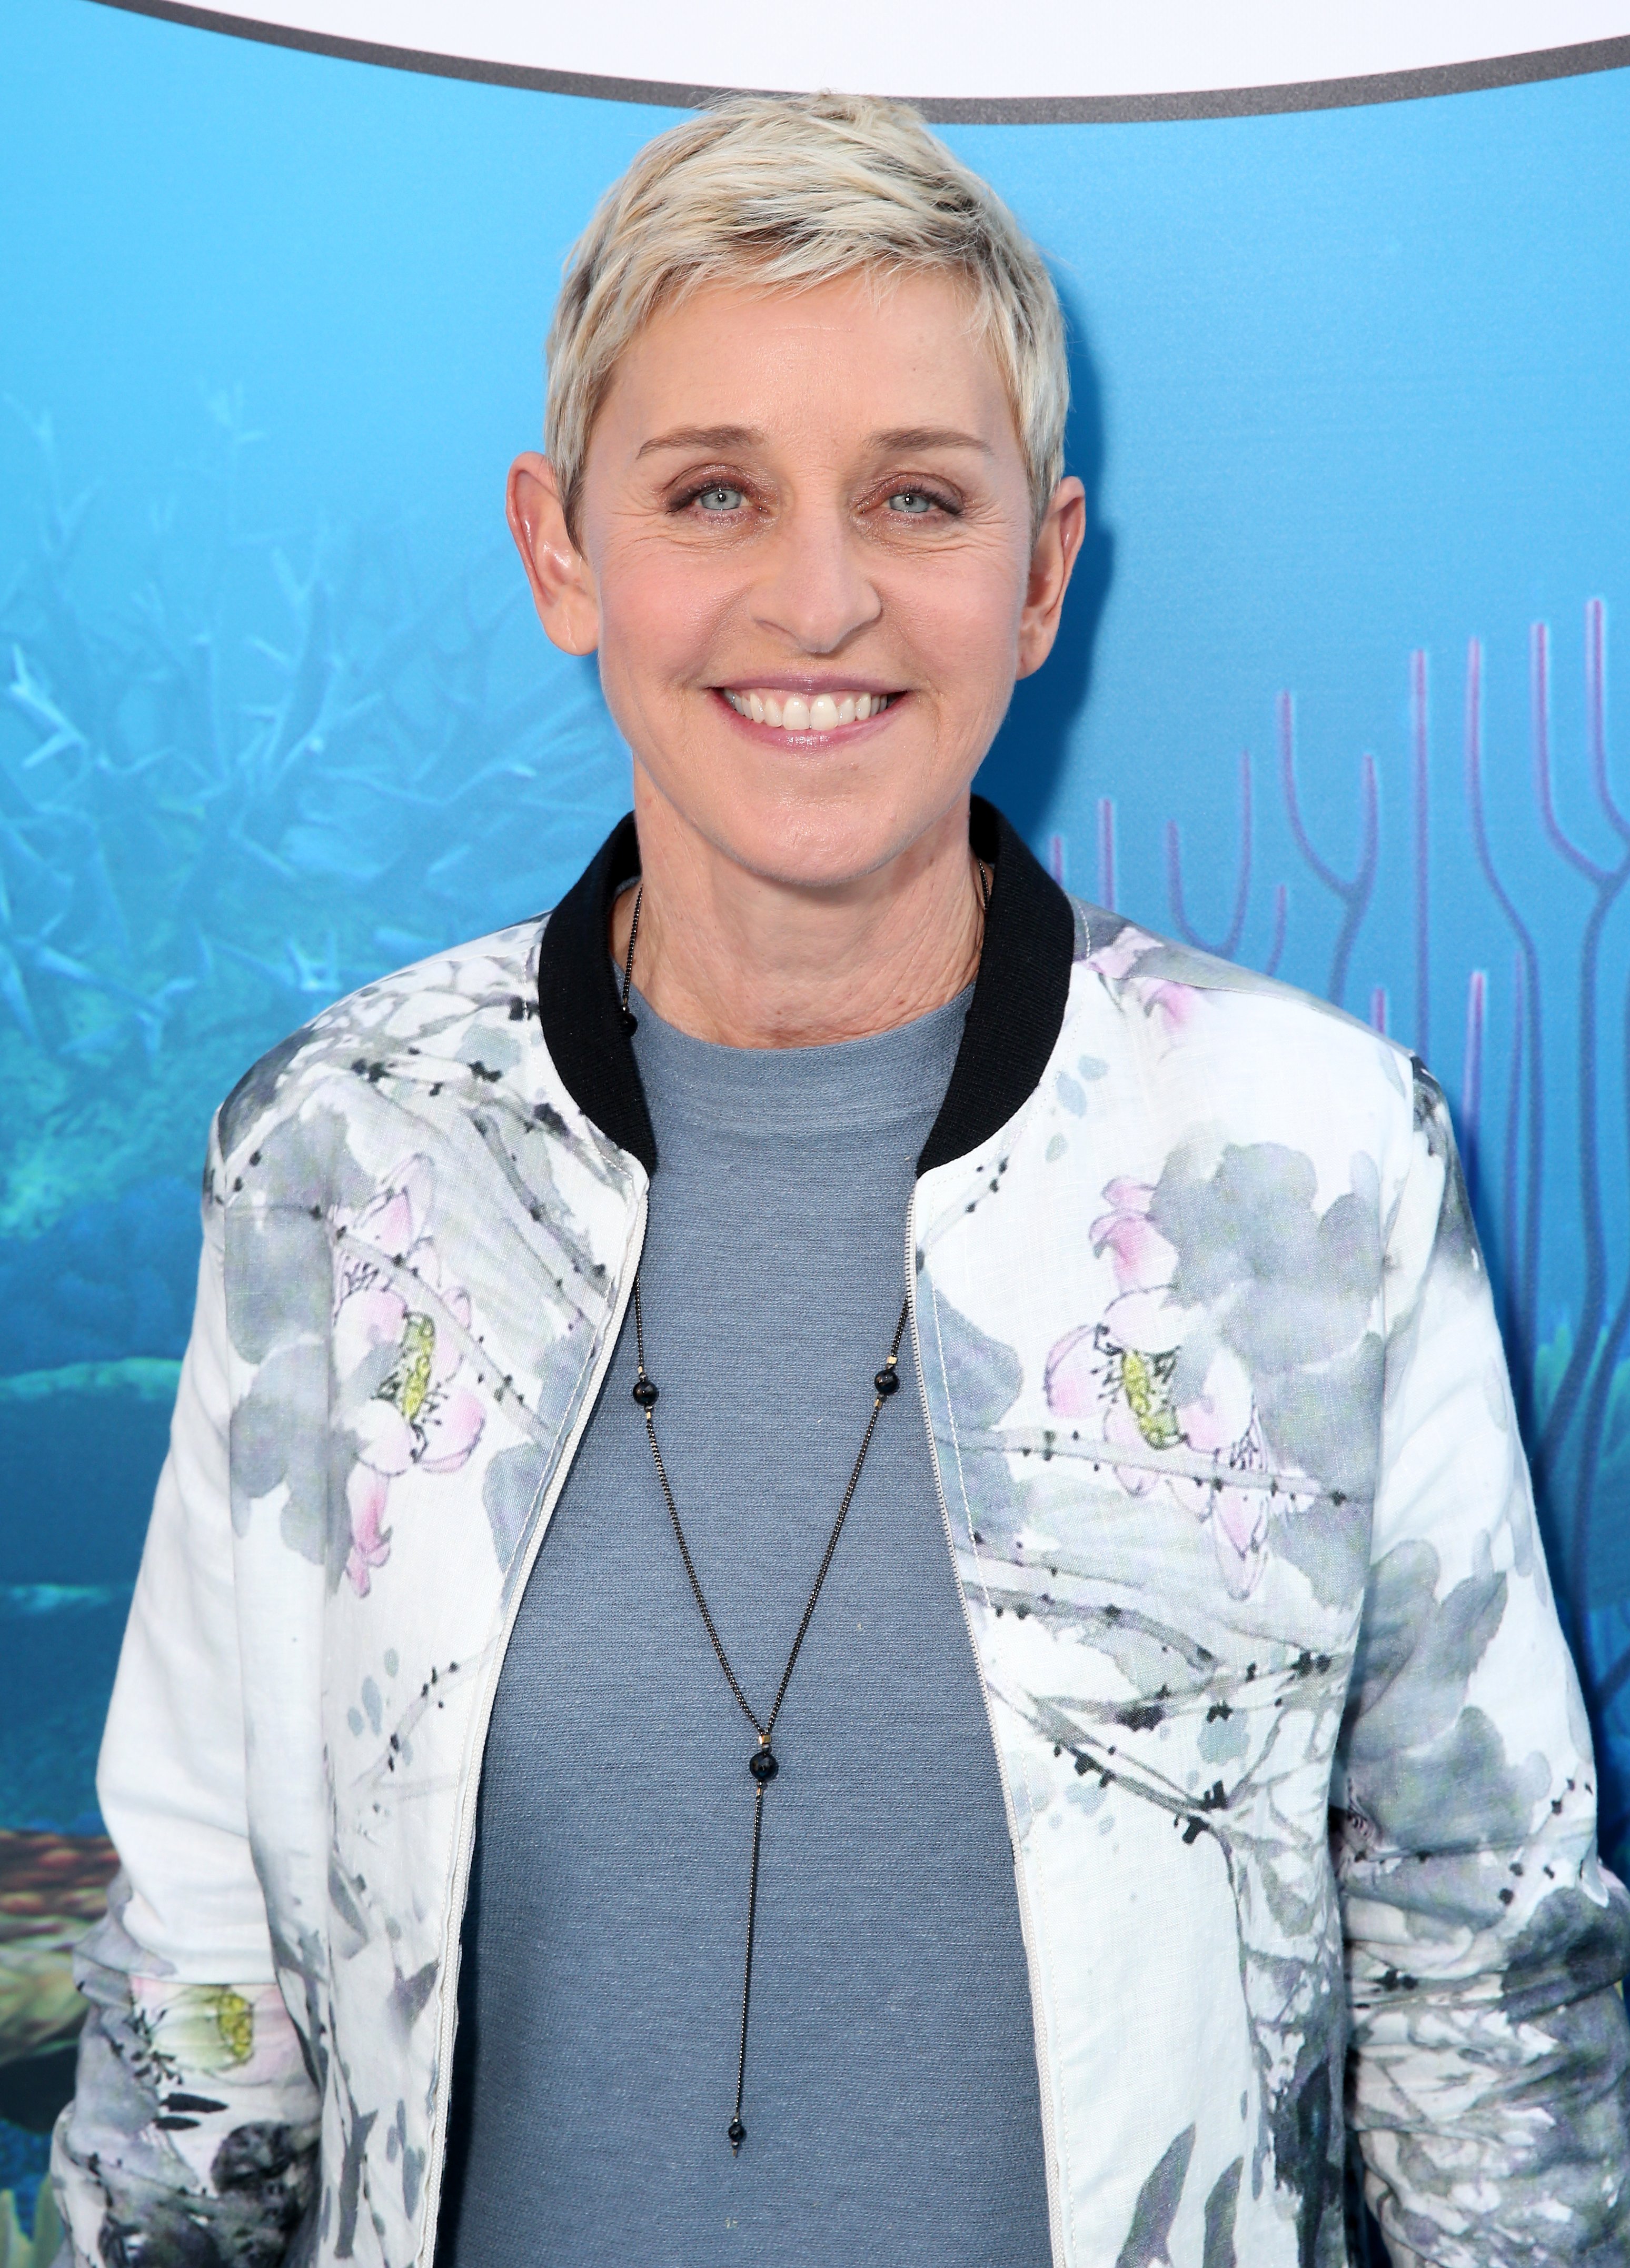 Ellen DeGeneres attends the world premiere of Disney-Pixar's 'Finding Dory' at the El Capitan Theatre on June 8, 2016, in Hollywood, California. | Photo: Getty Images.